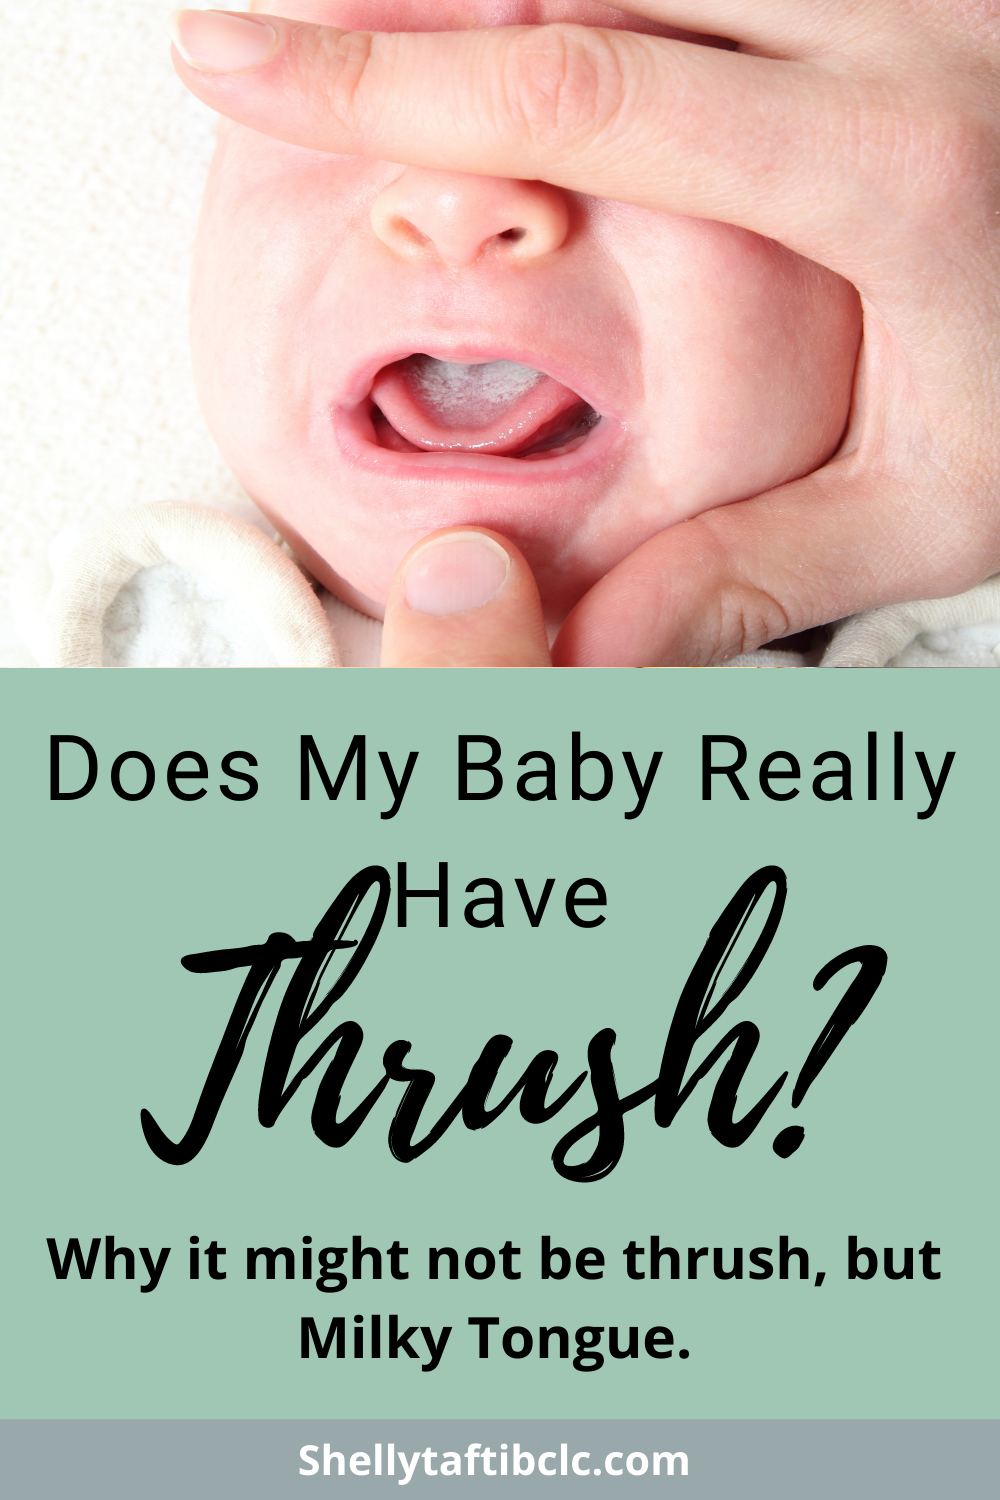 Does my baby have thrush